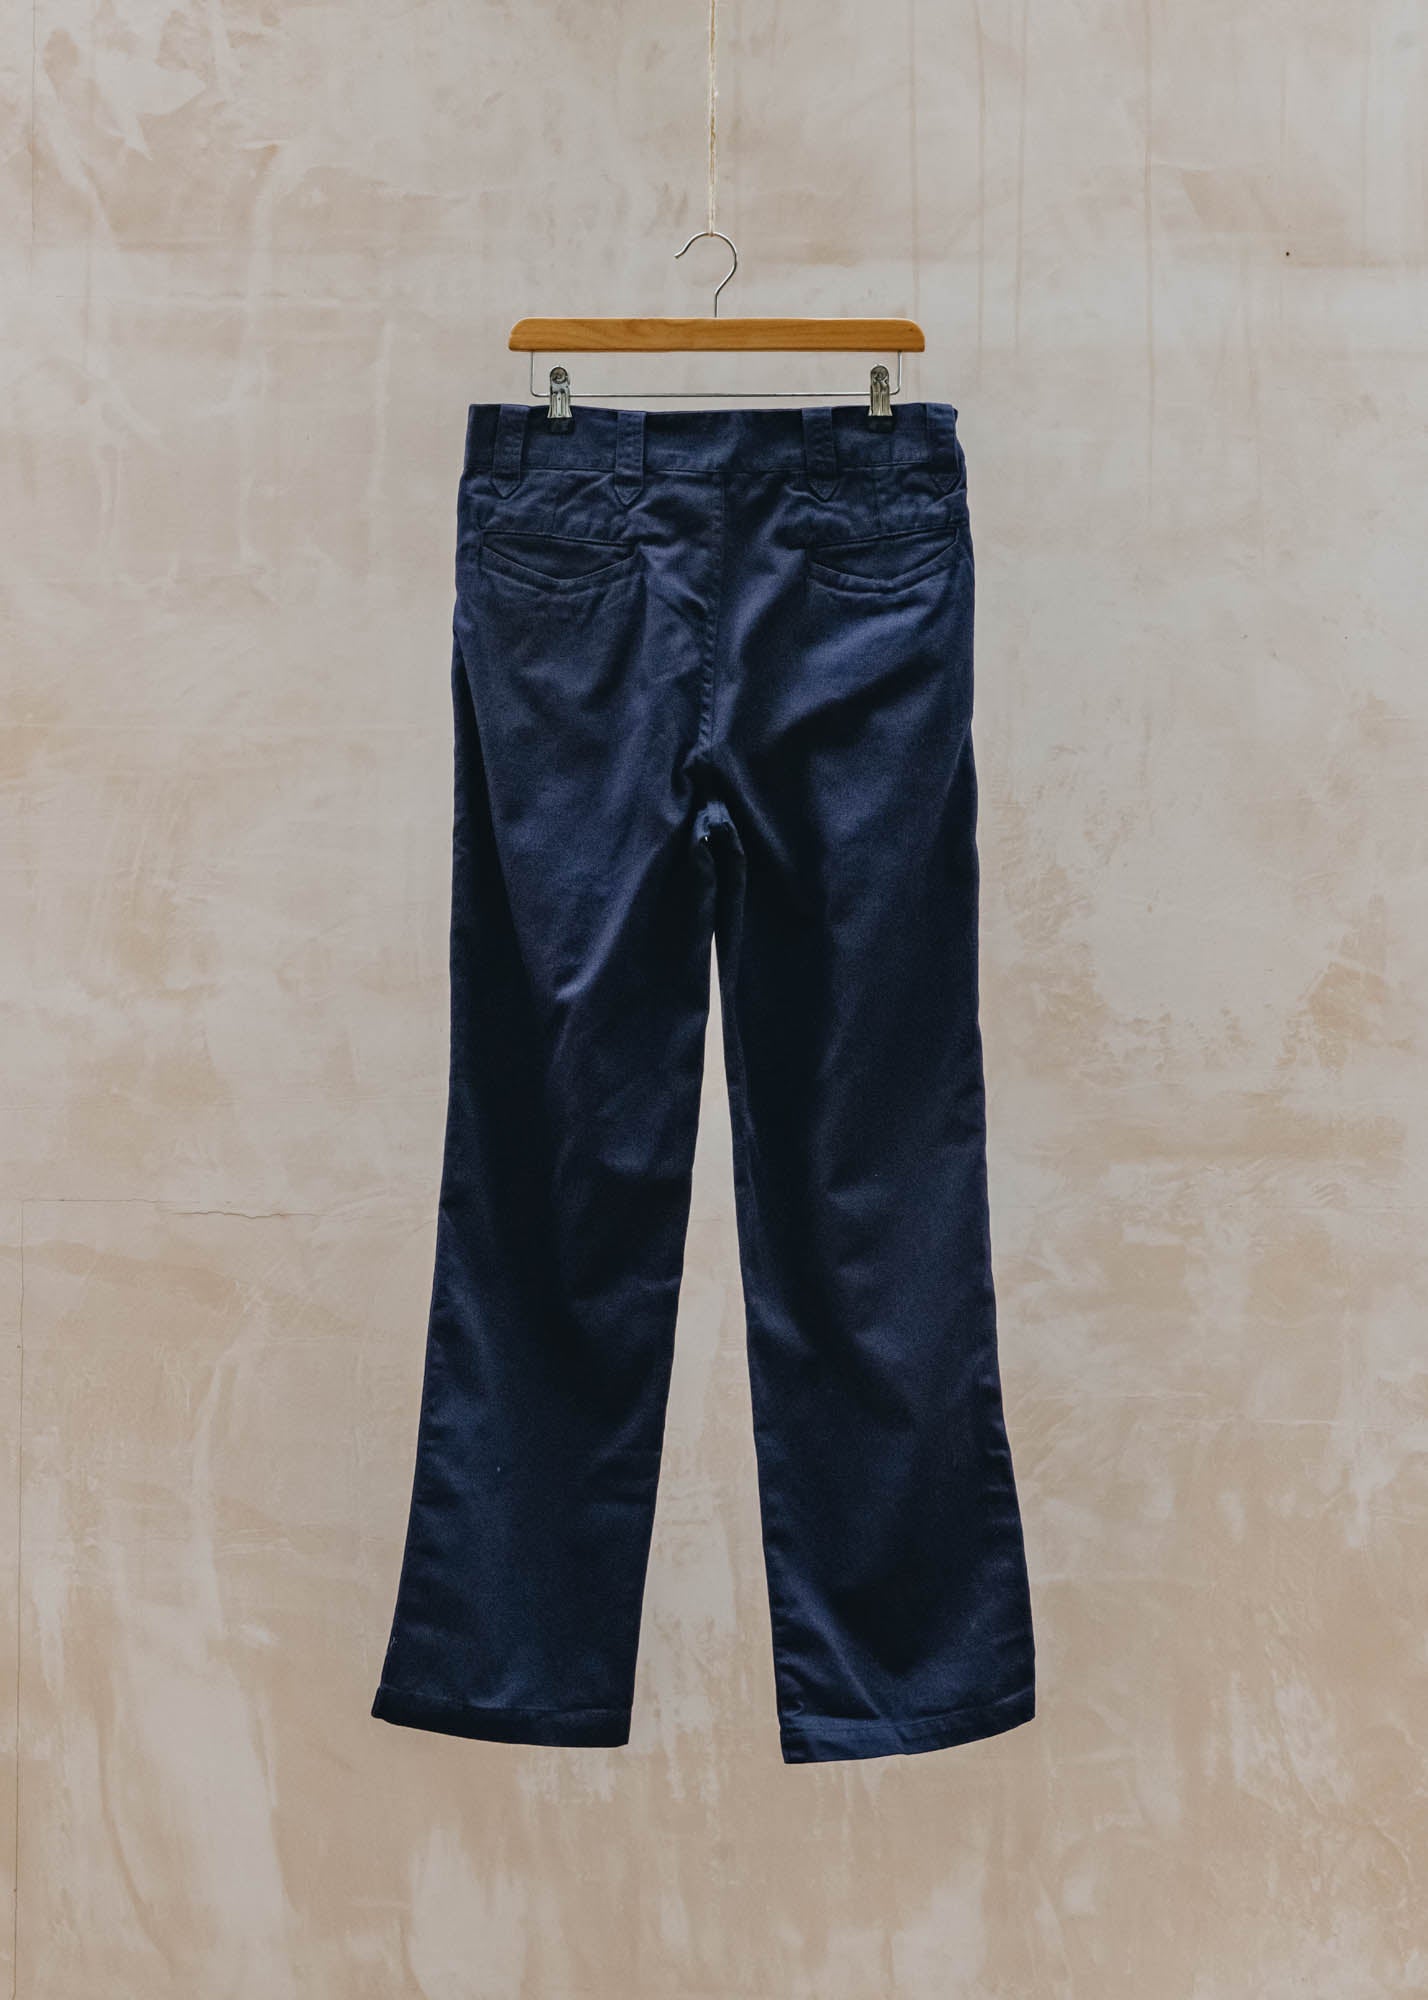 Yarmouth Oilskins Work Trousers in Navy